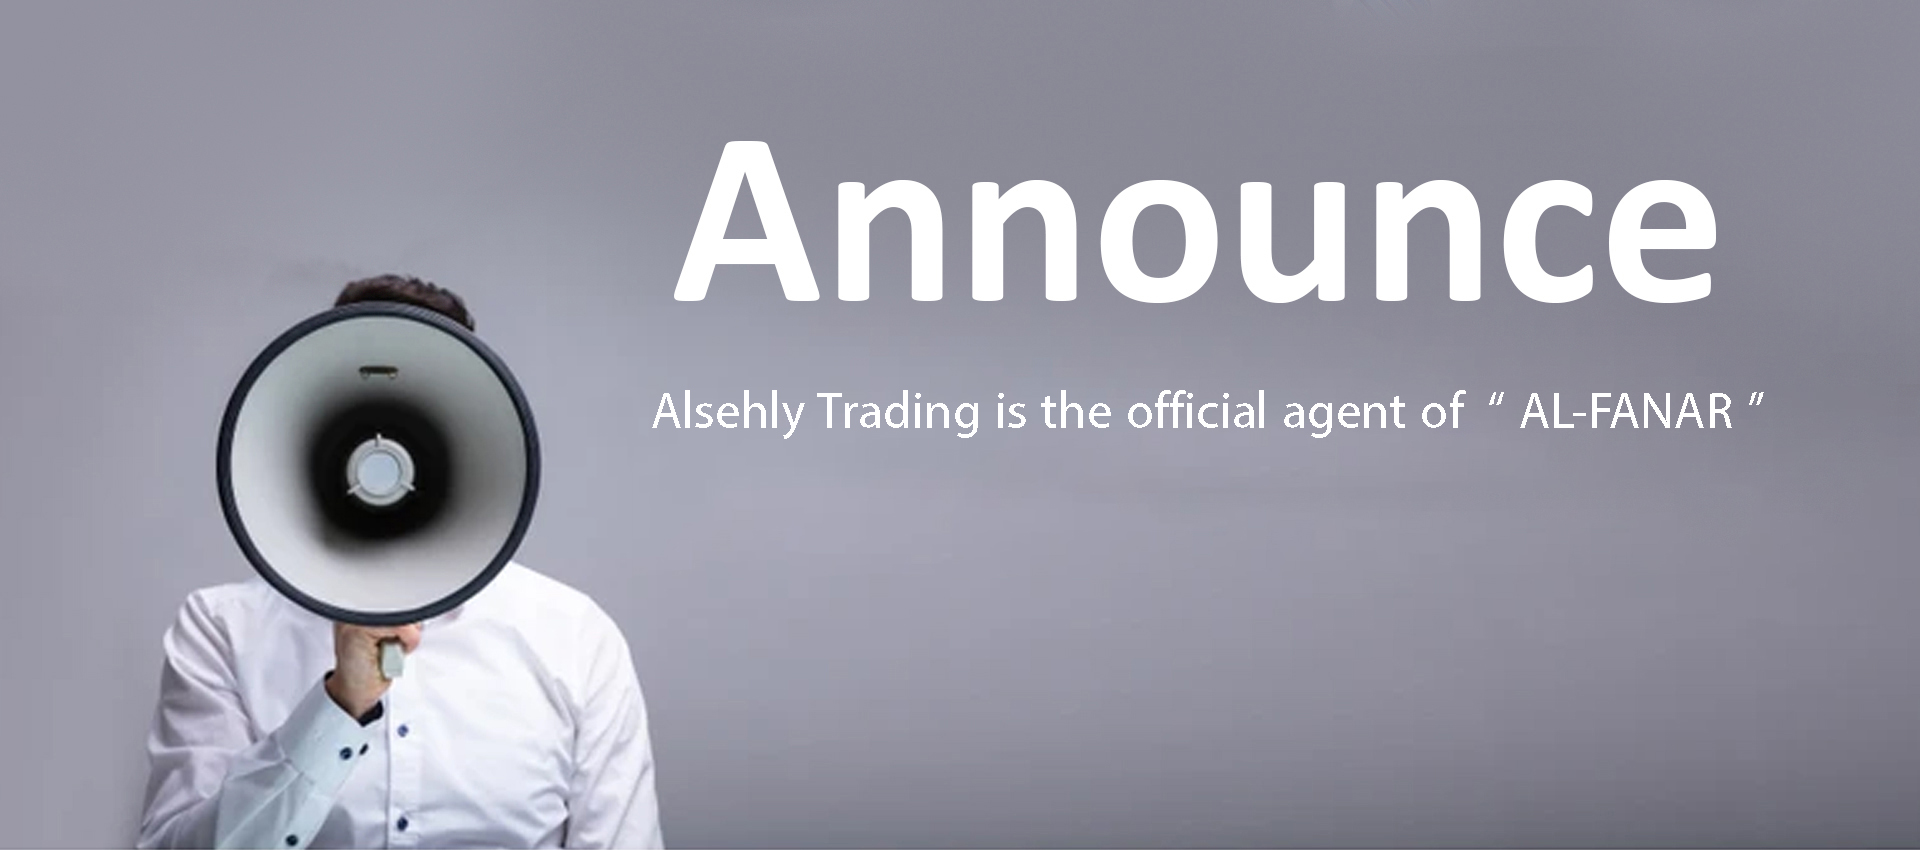 Alsehly Trading is the official agent of 